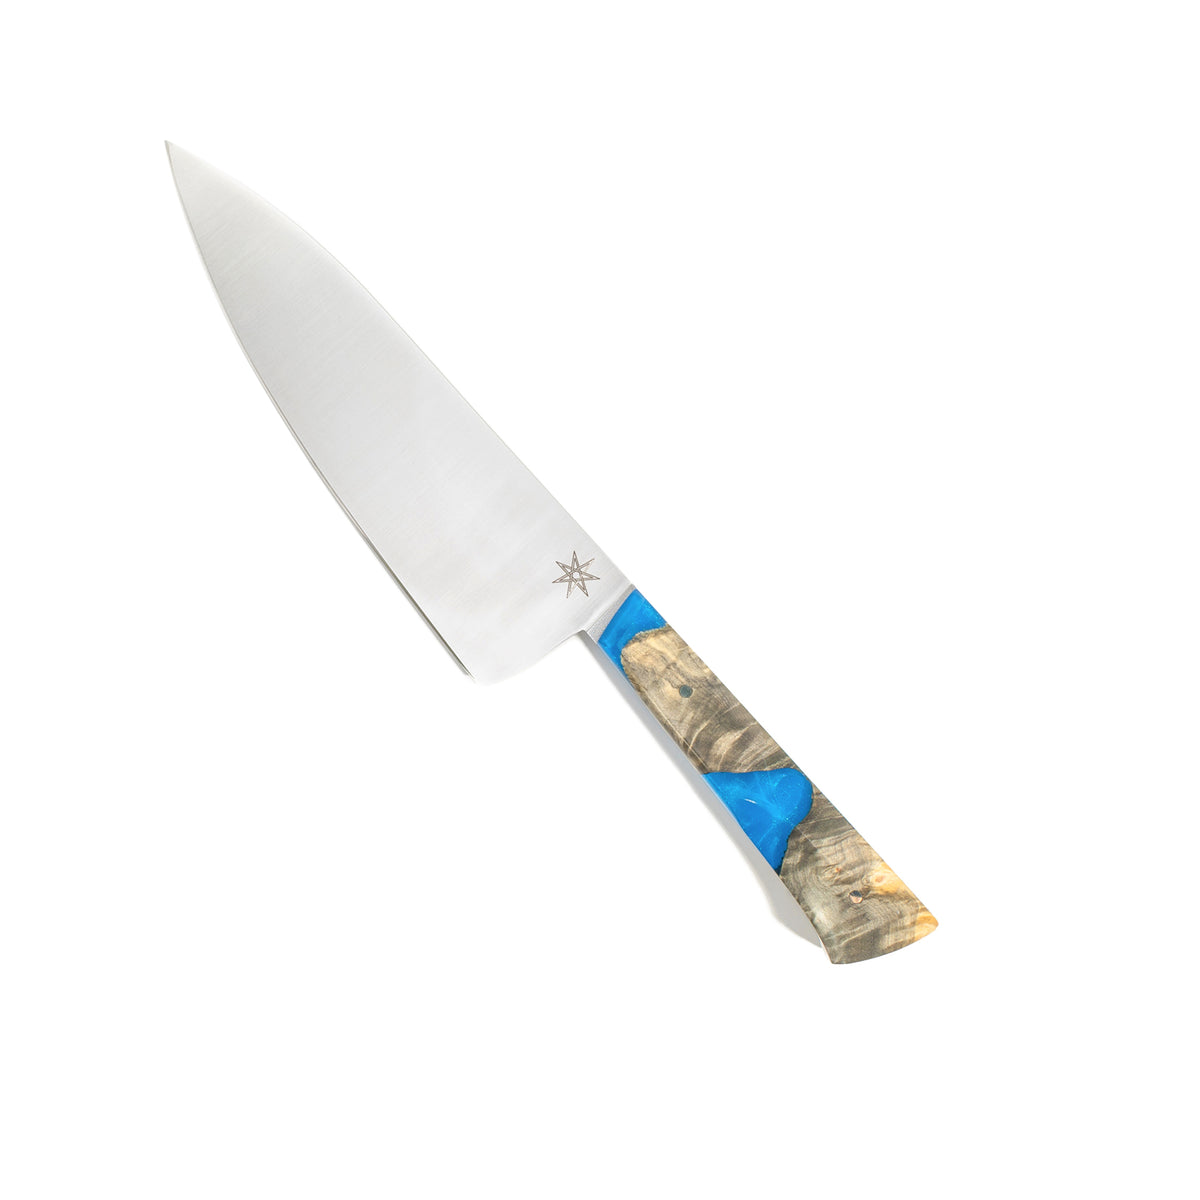 Town Cutler Tahoe Bliss 7" Chef Knife. Stainless steel blade with blue and buckeye burl handle.